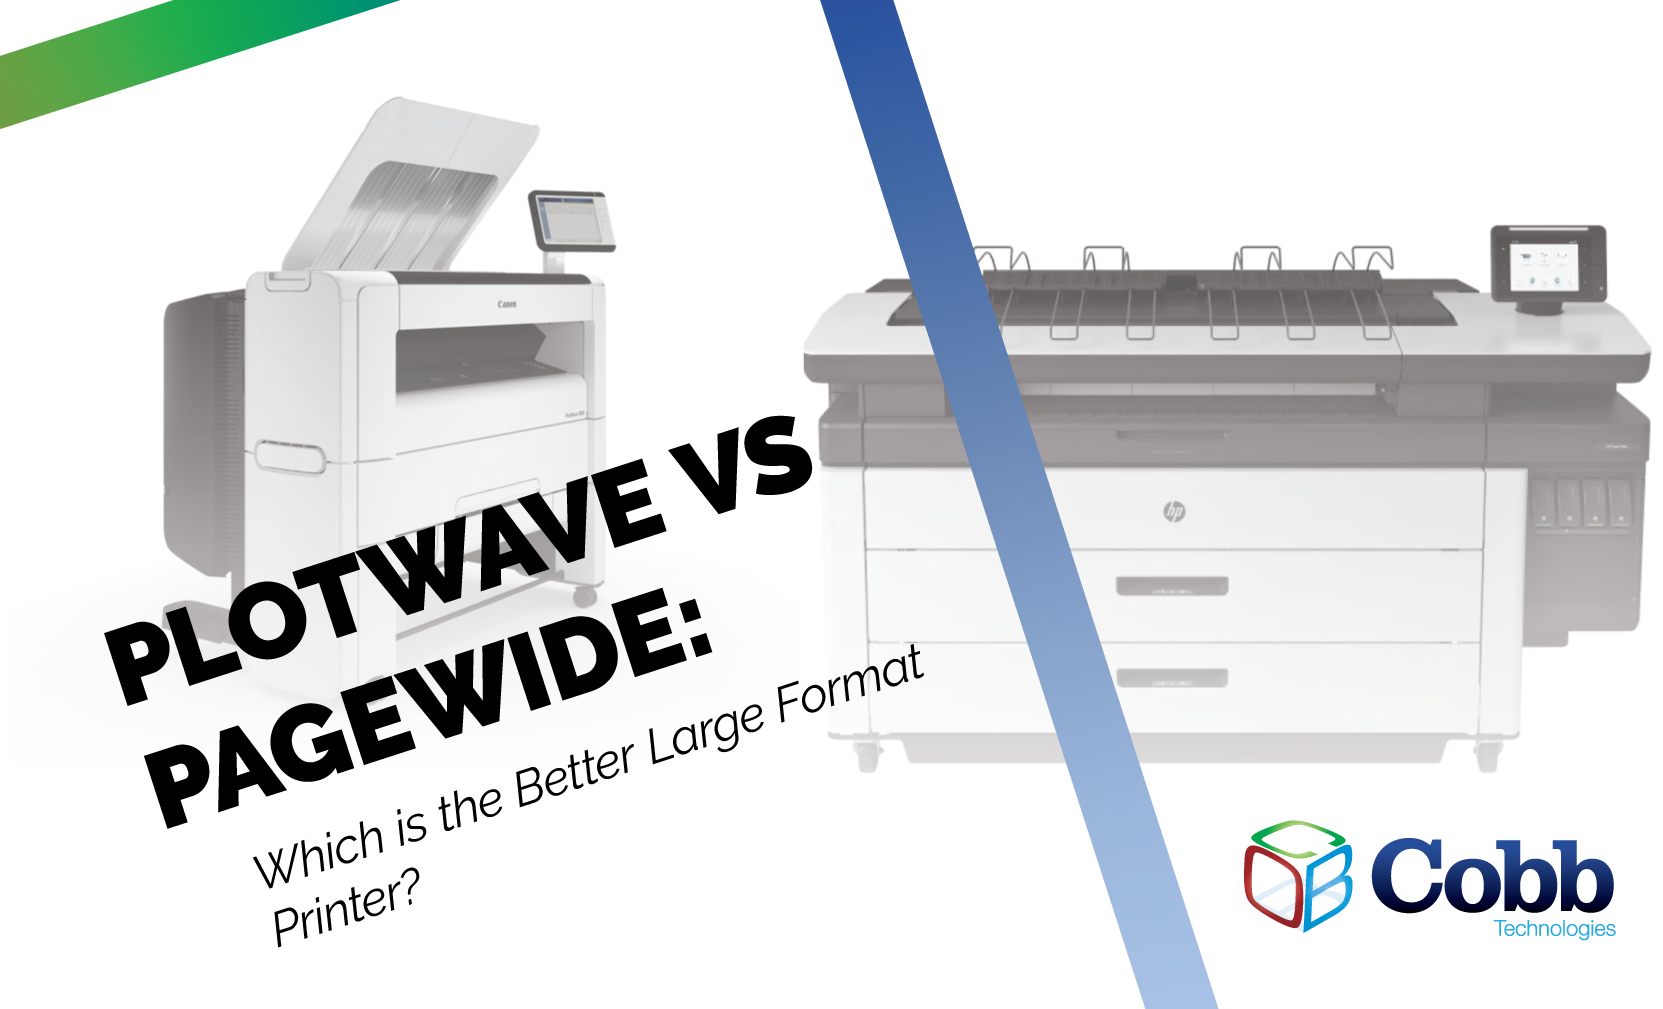 Canon PlotWave vs. HP PageWide: Which is the Better Large Format Printer?